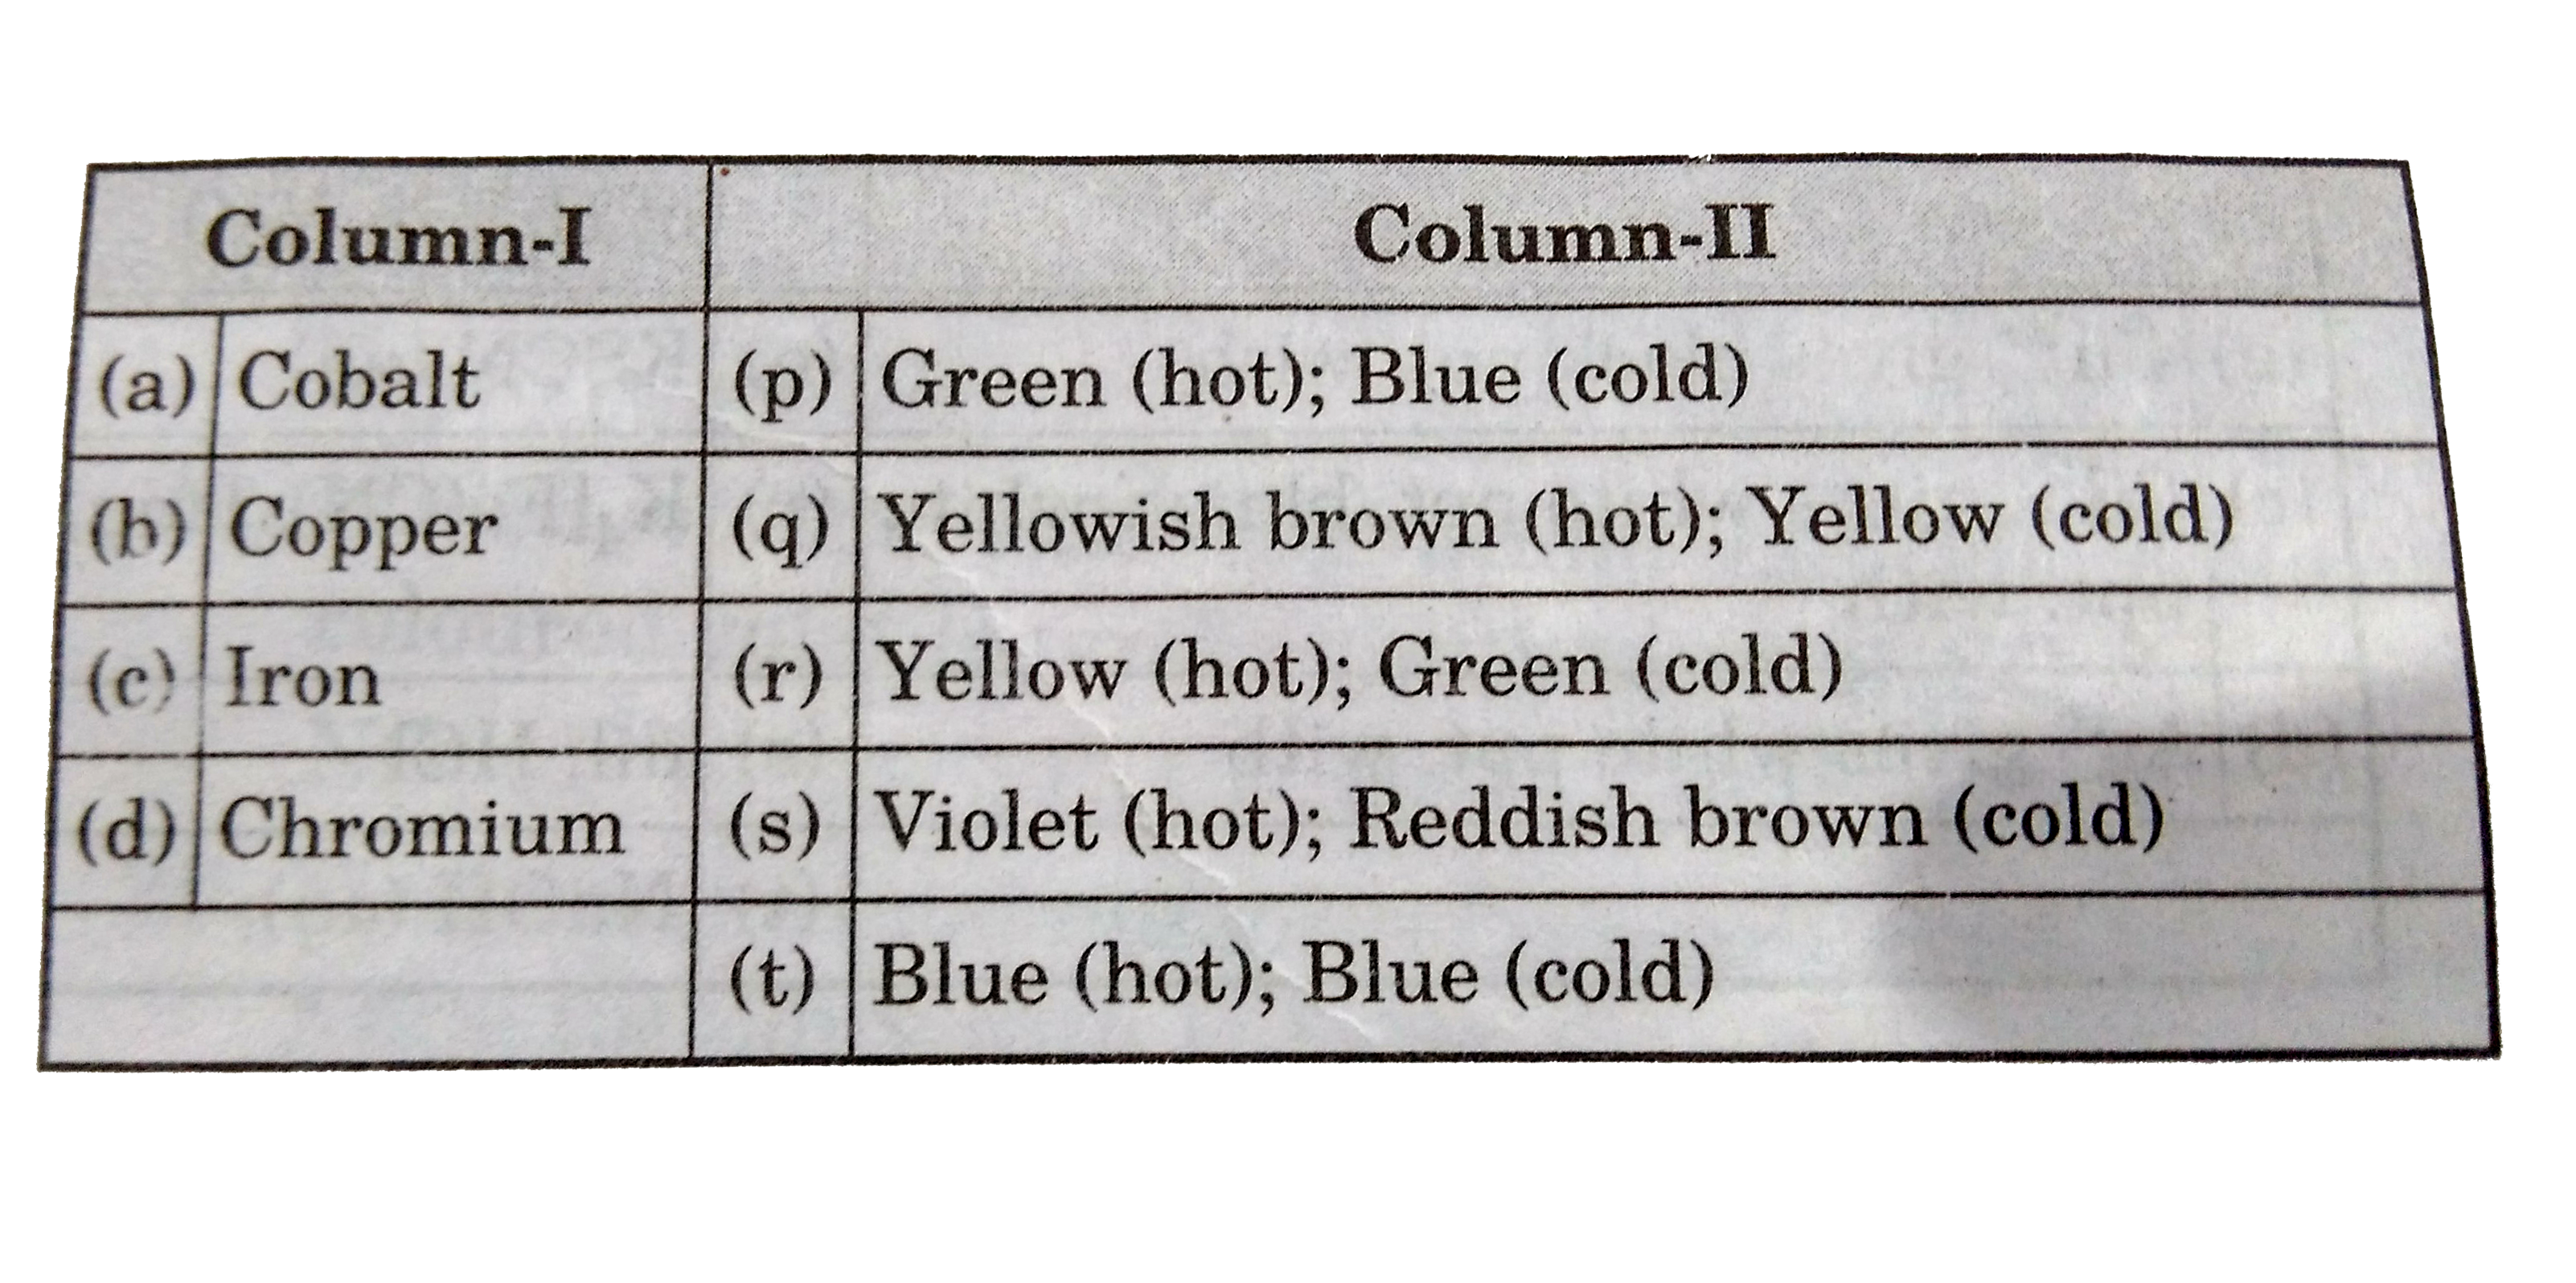 Column-I lists some of elements whose salts impart characteristics colour in oxidising flame in the borax bead test. These are mentioned in column-II. Match each entries from column-I and column-II.